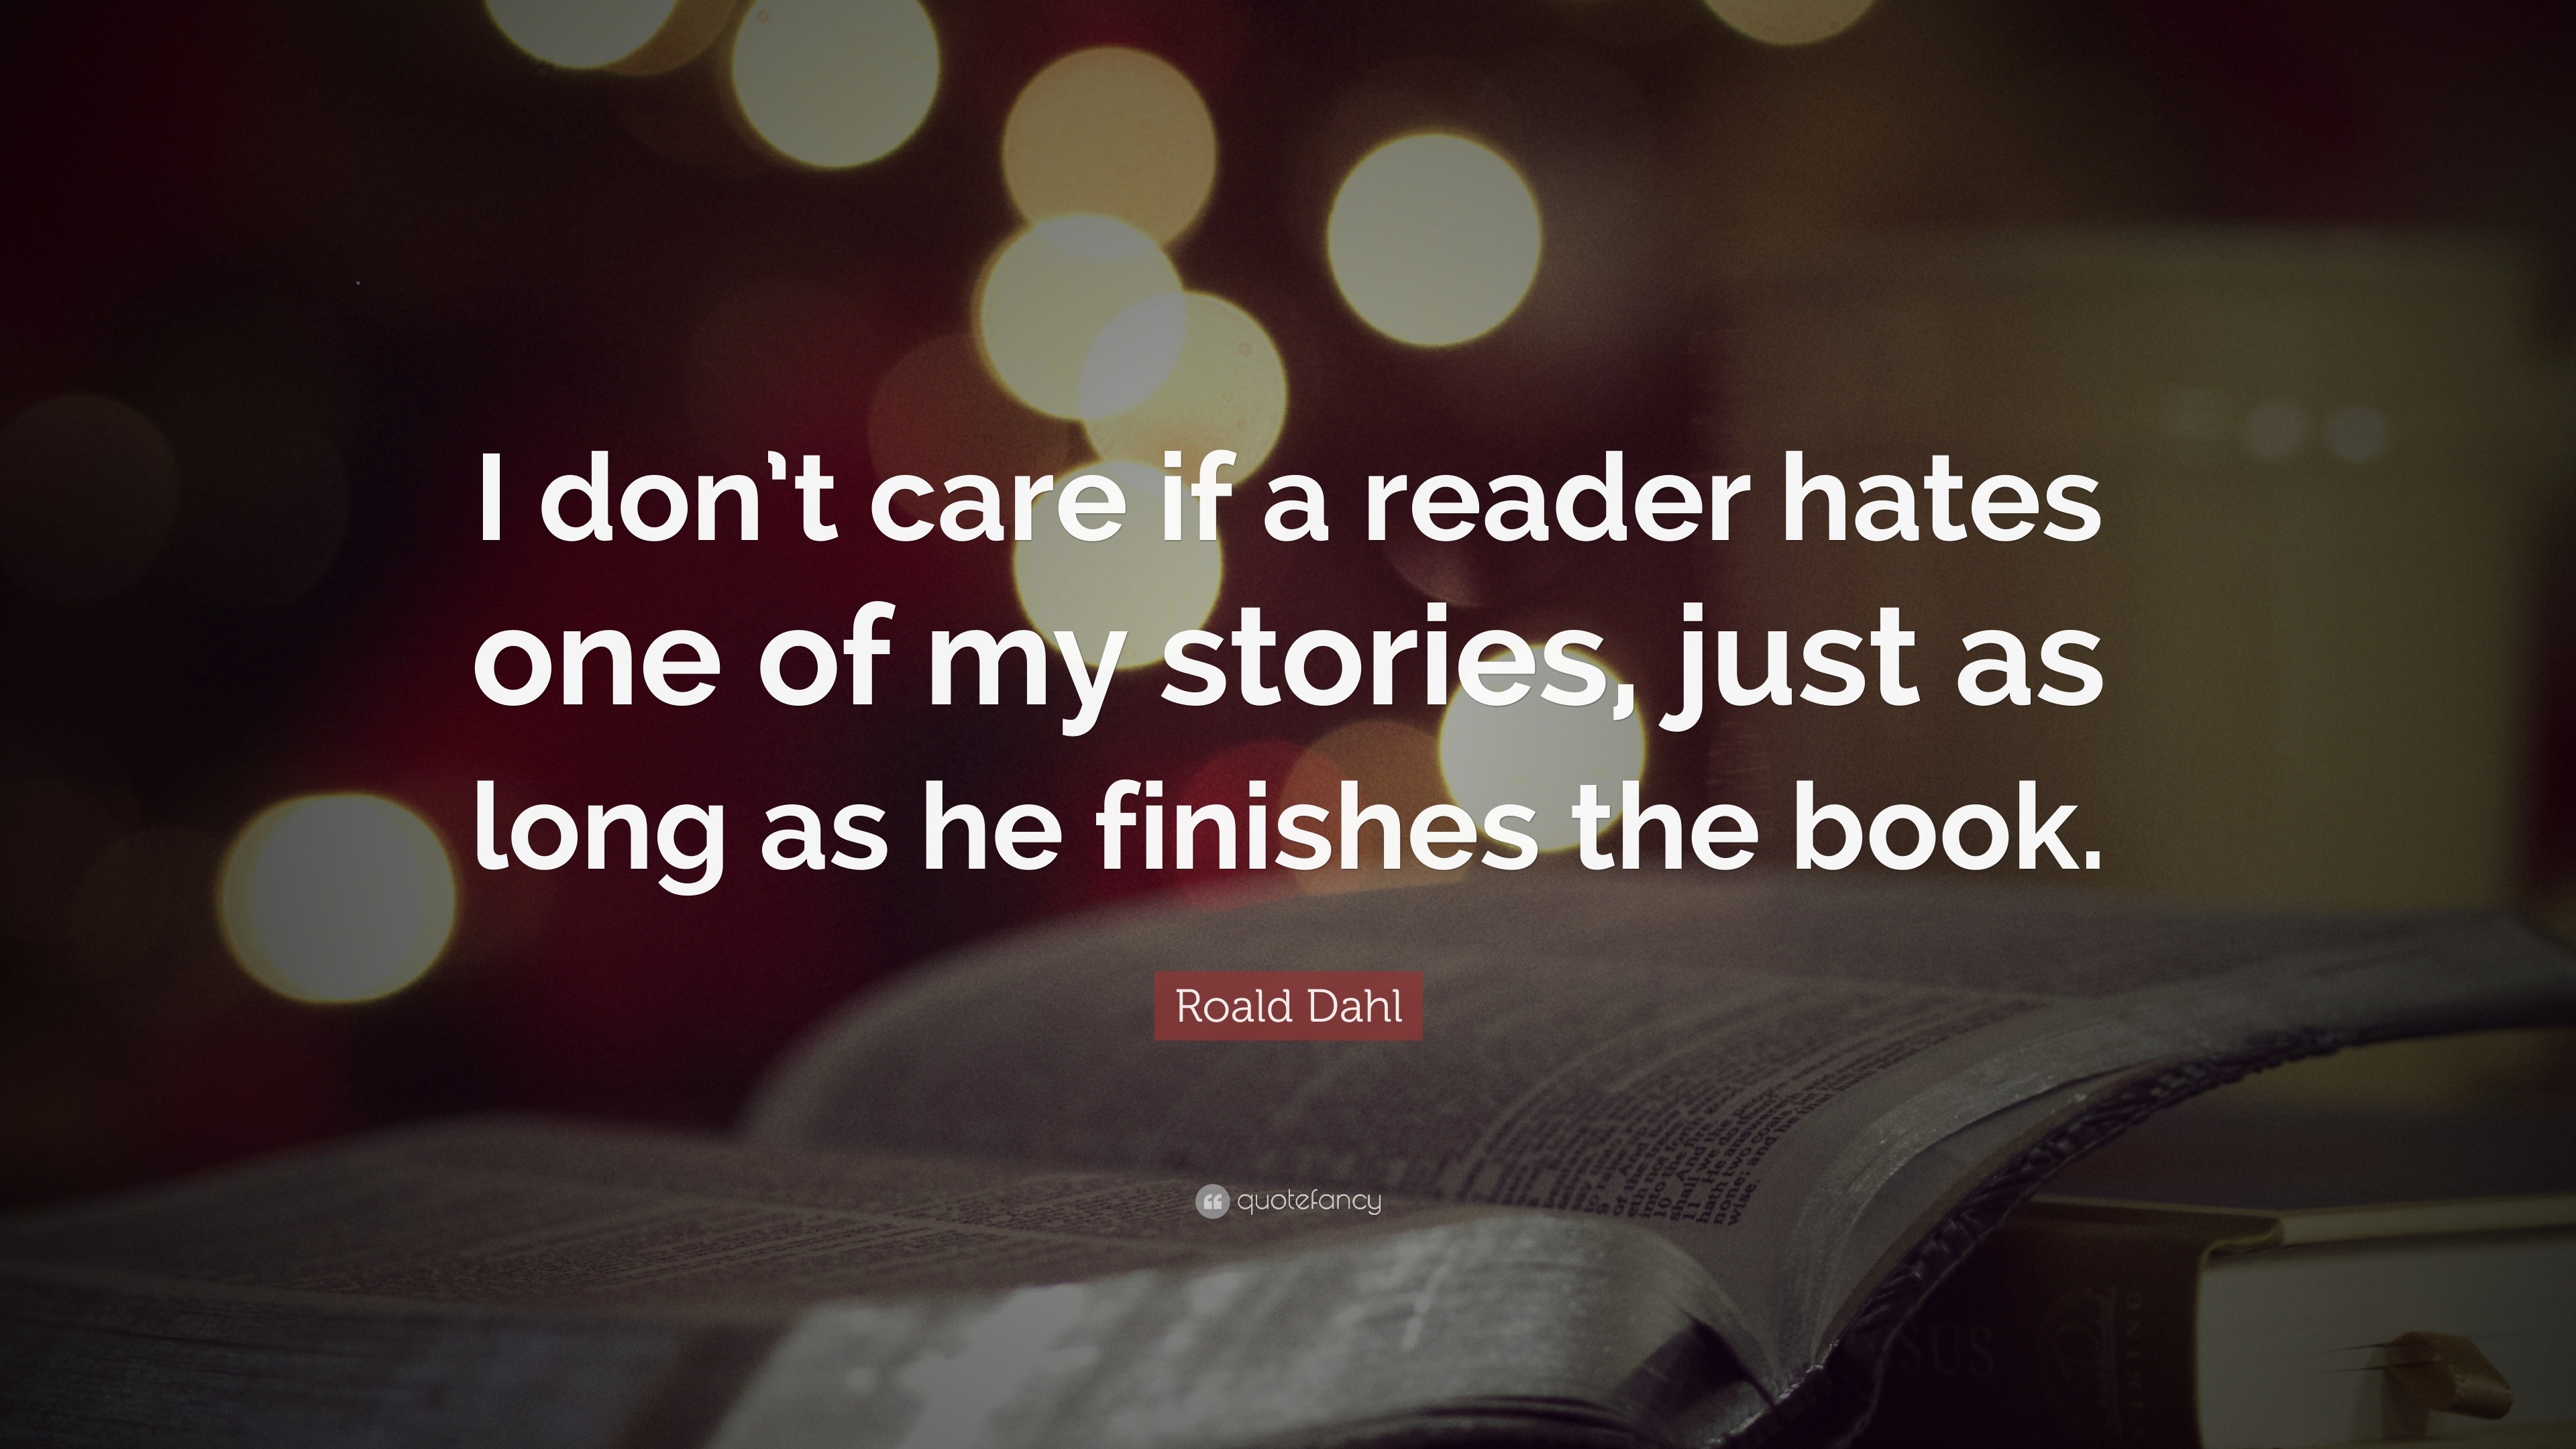 Hate Quotes “I don t care if a reader hates one of my